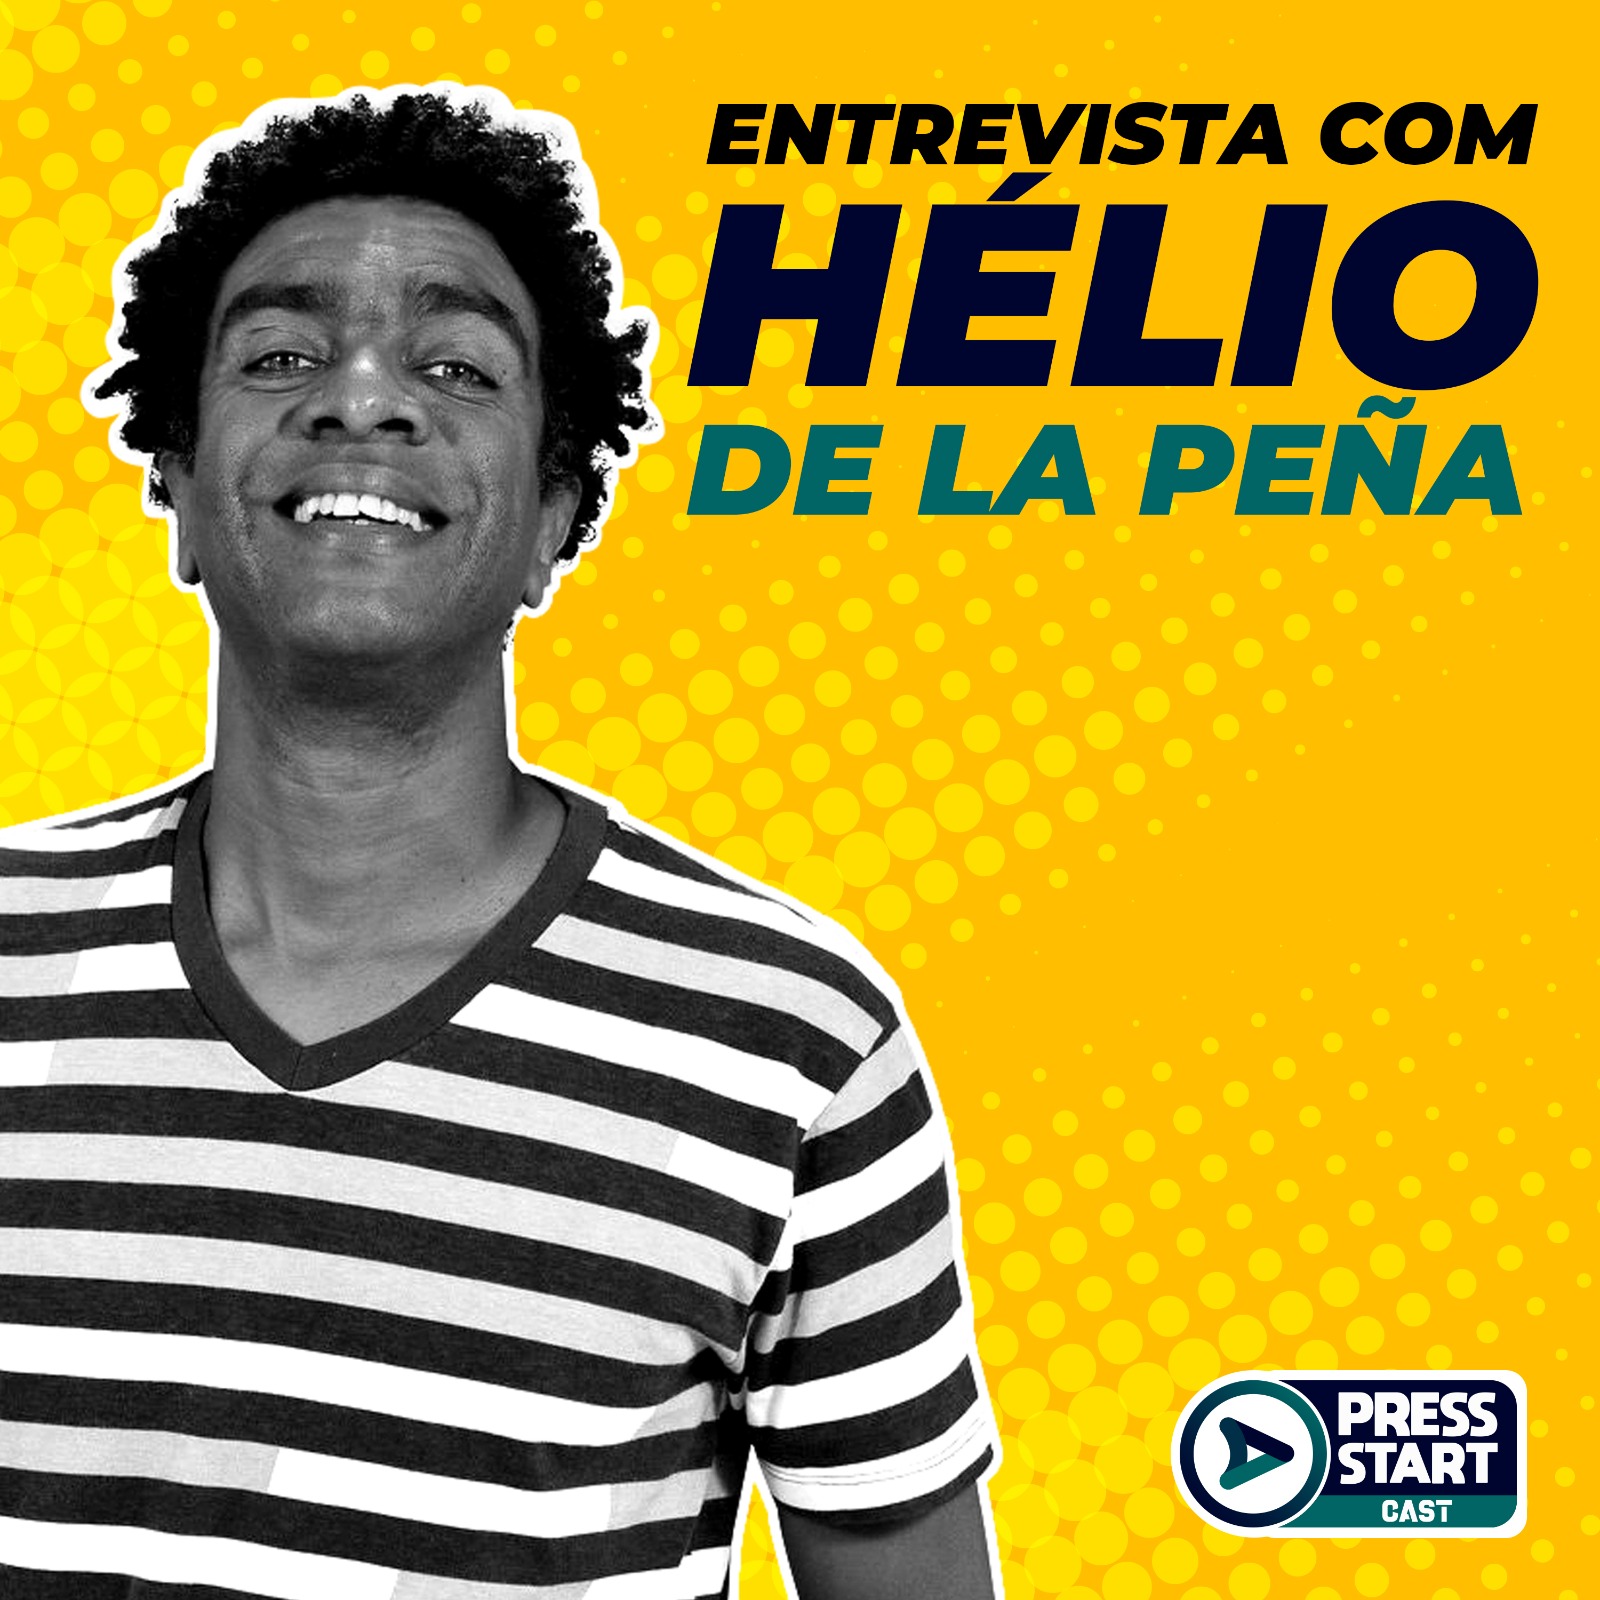 words that start with helio